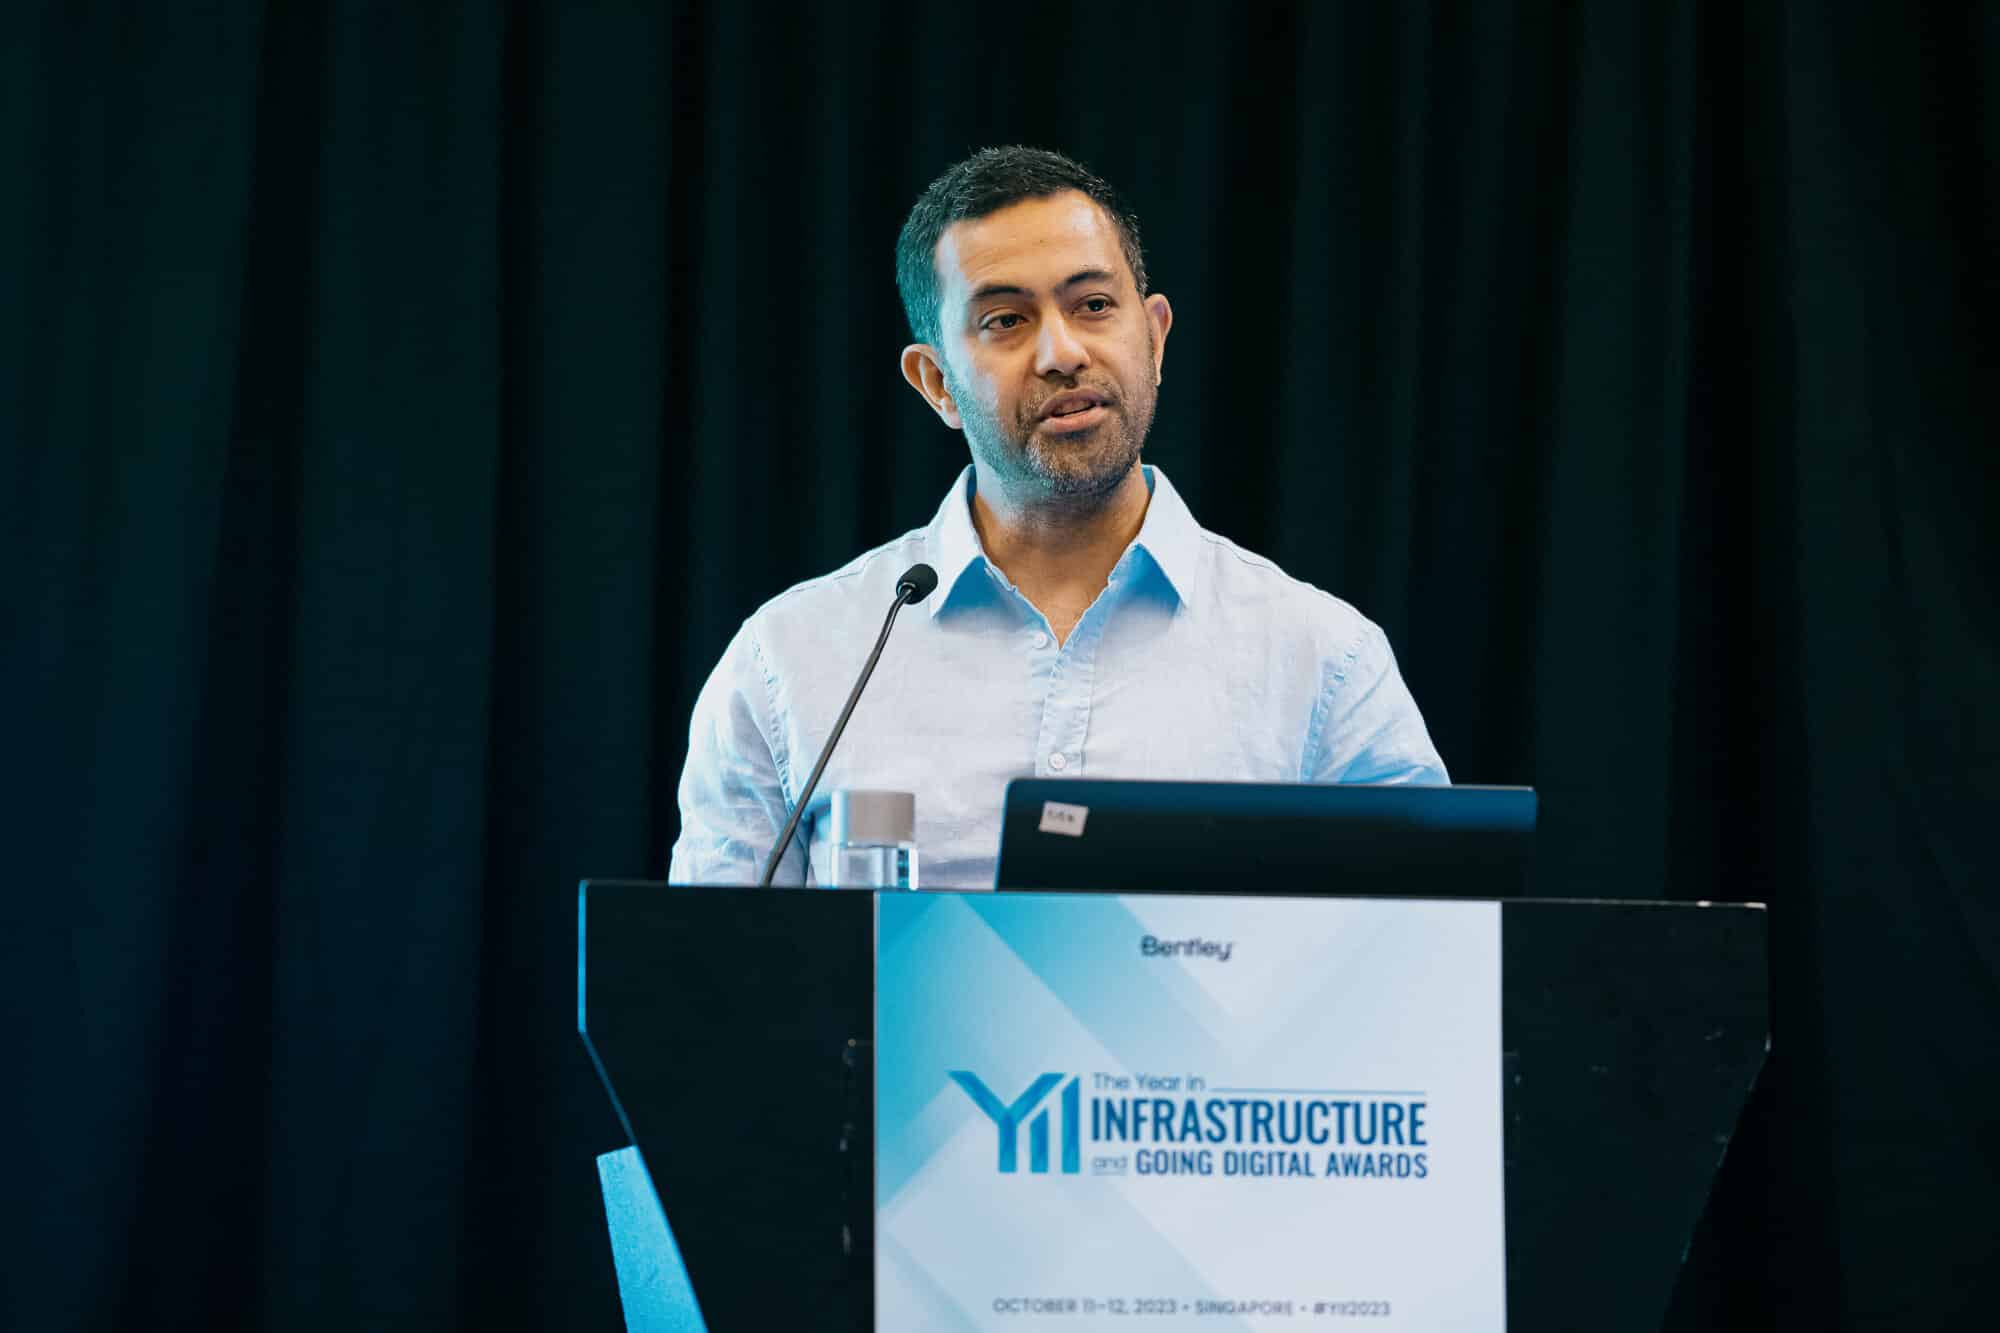 A photo of OceanaGold's Andre Alipate, Senior Engineer speaking at Bentley's YII Going Digital Awards 2023